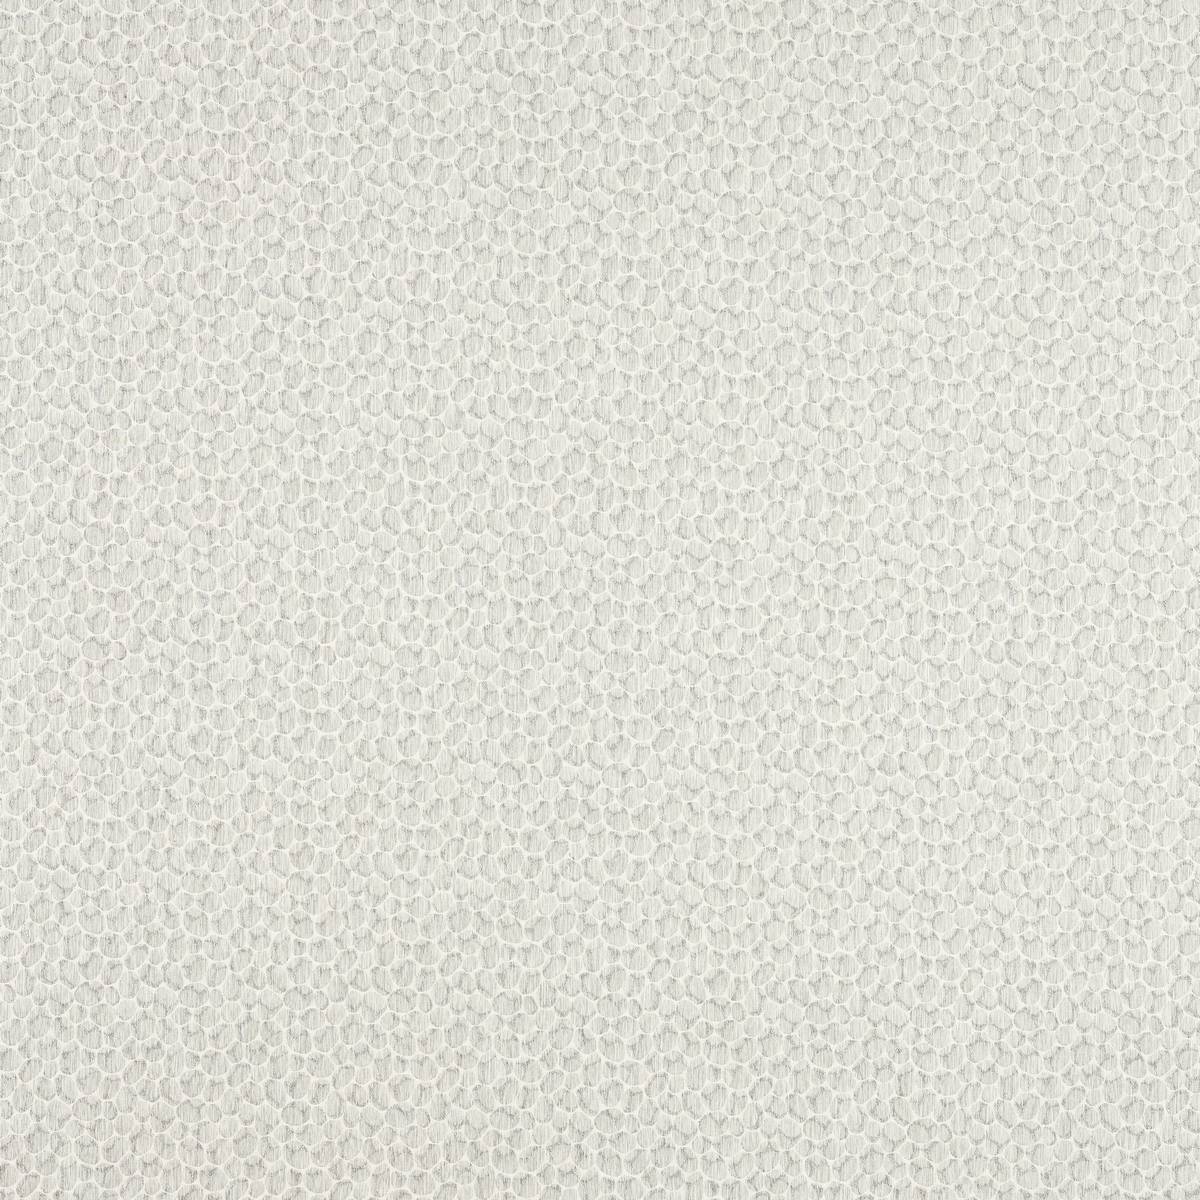 Cobble Gull Fabric by Sanderson